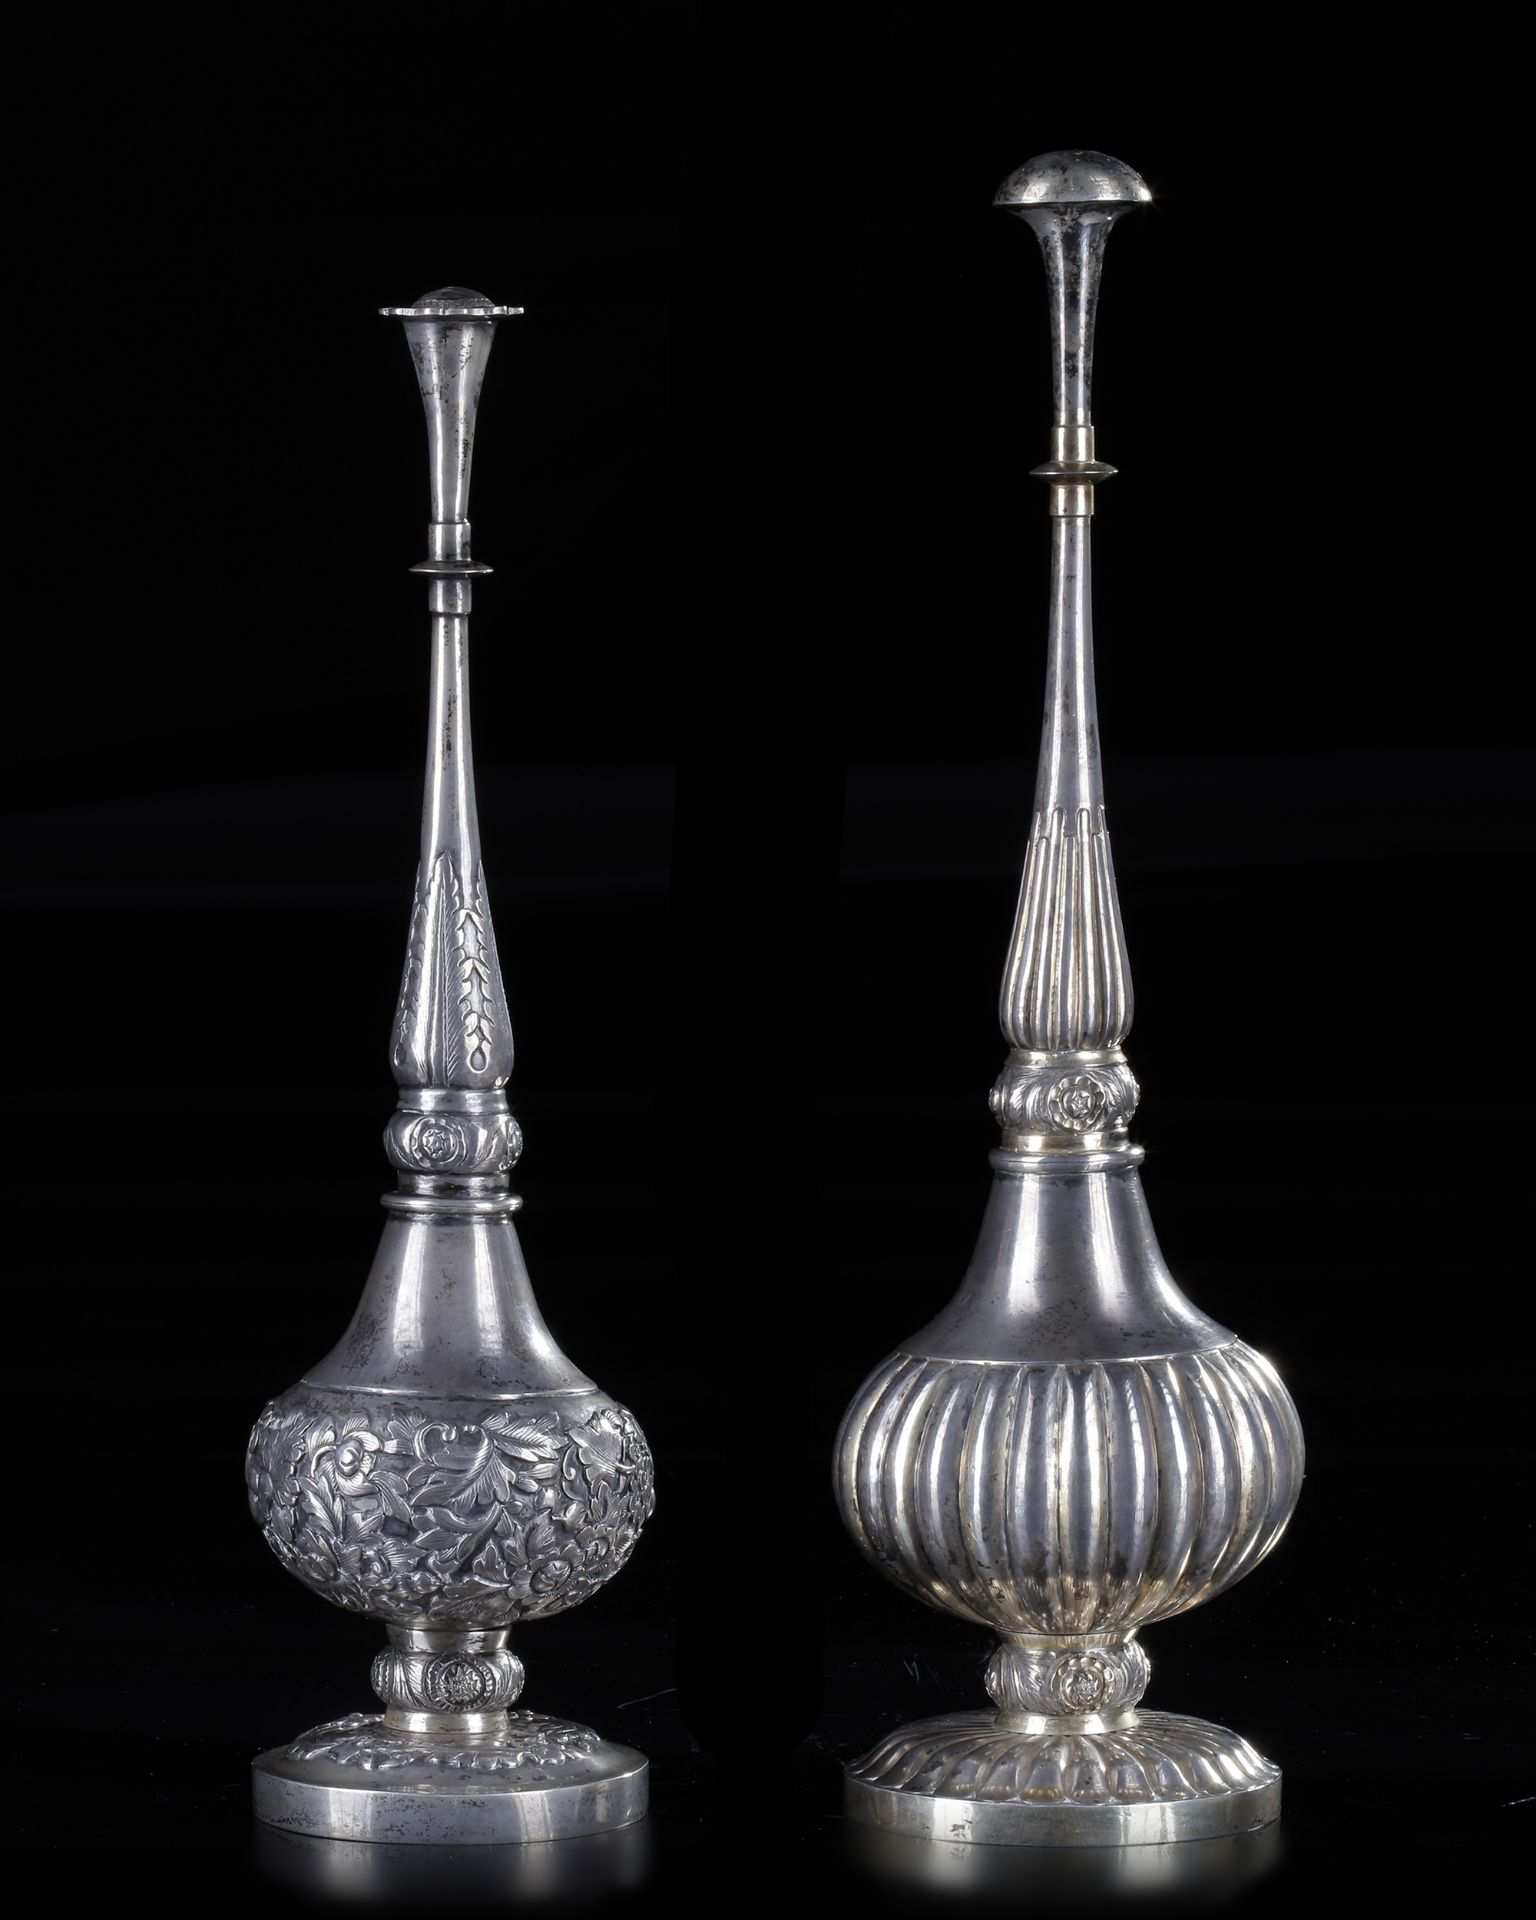 TWO OTTOMAN SILVER ROSEWATER SPRINKLERS, 19TH CENTURY